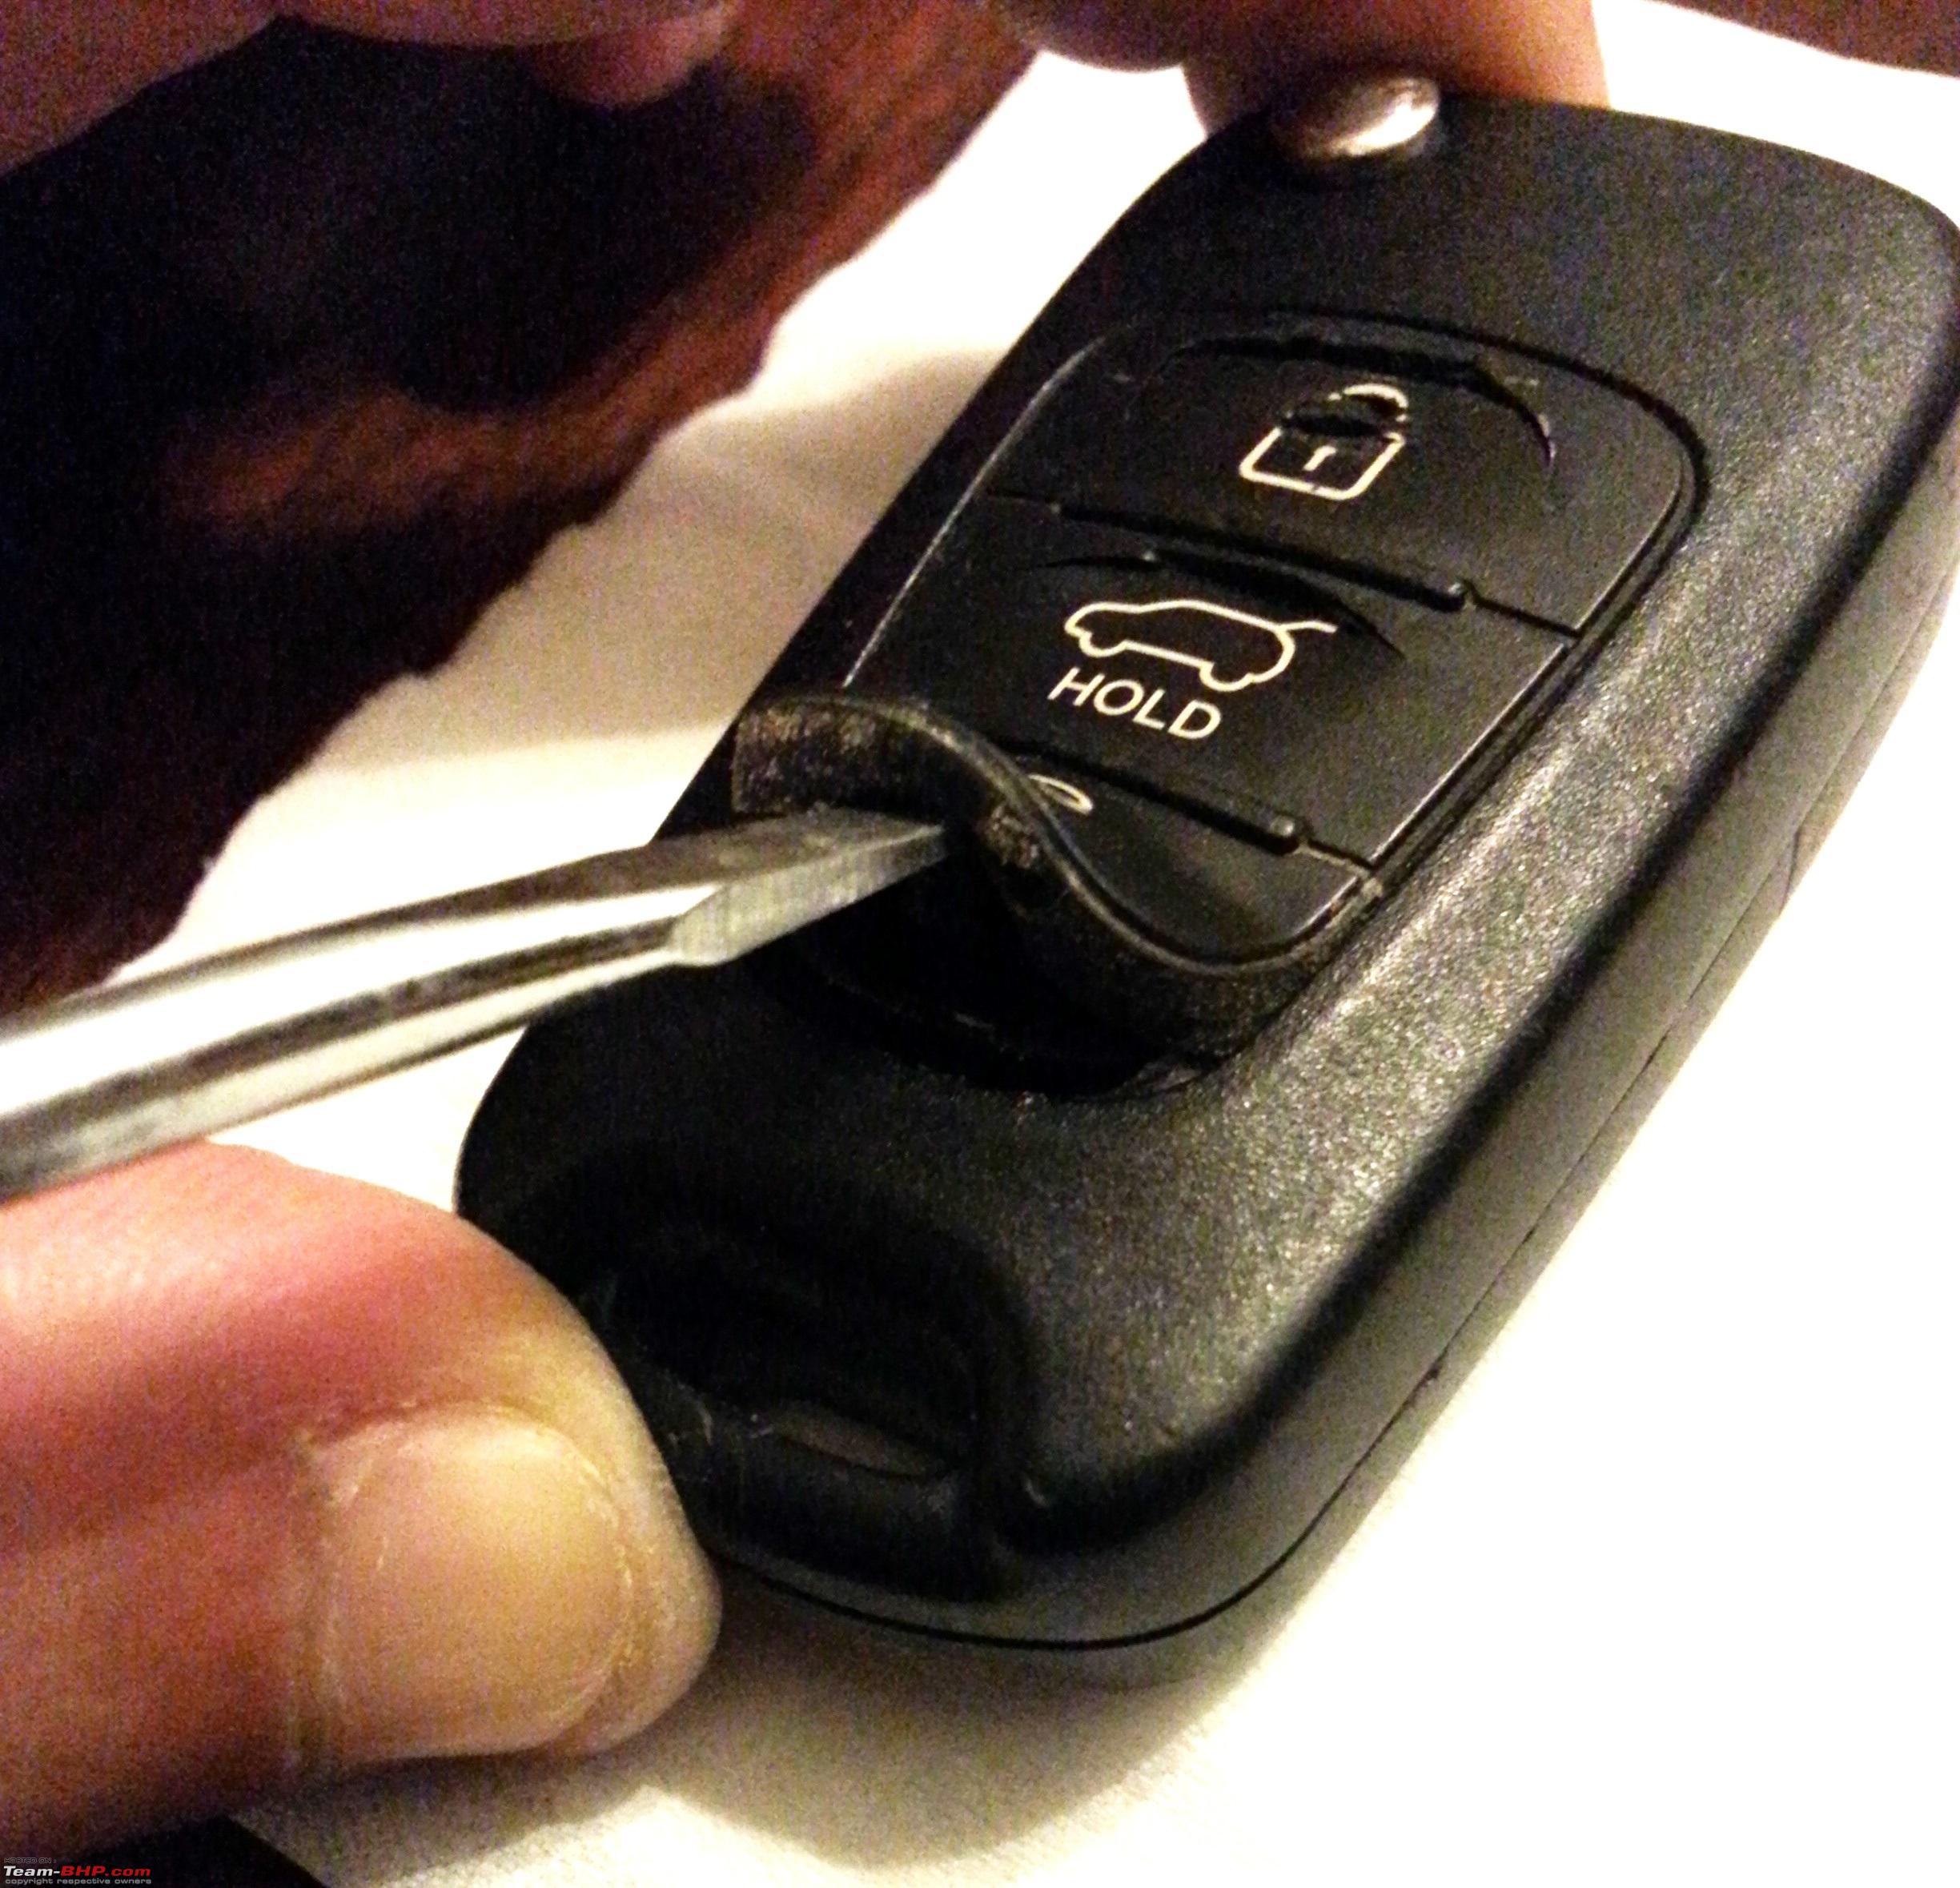 How To Replace Install Battery Car Key Fob Remote Easy Simple 